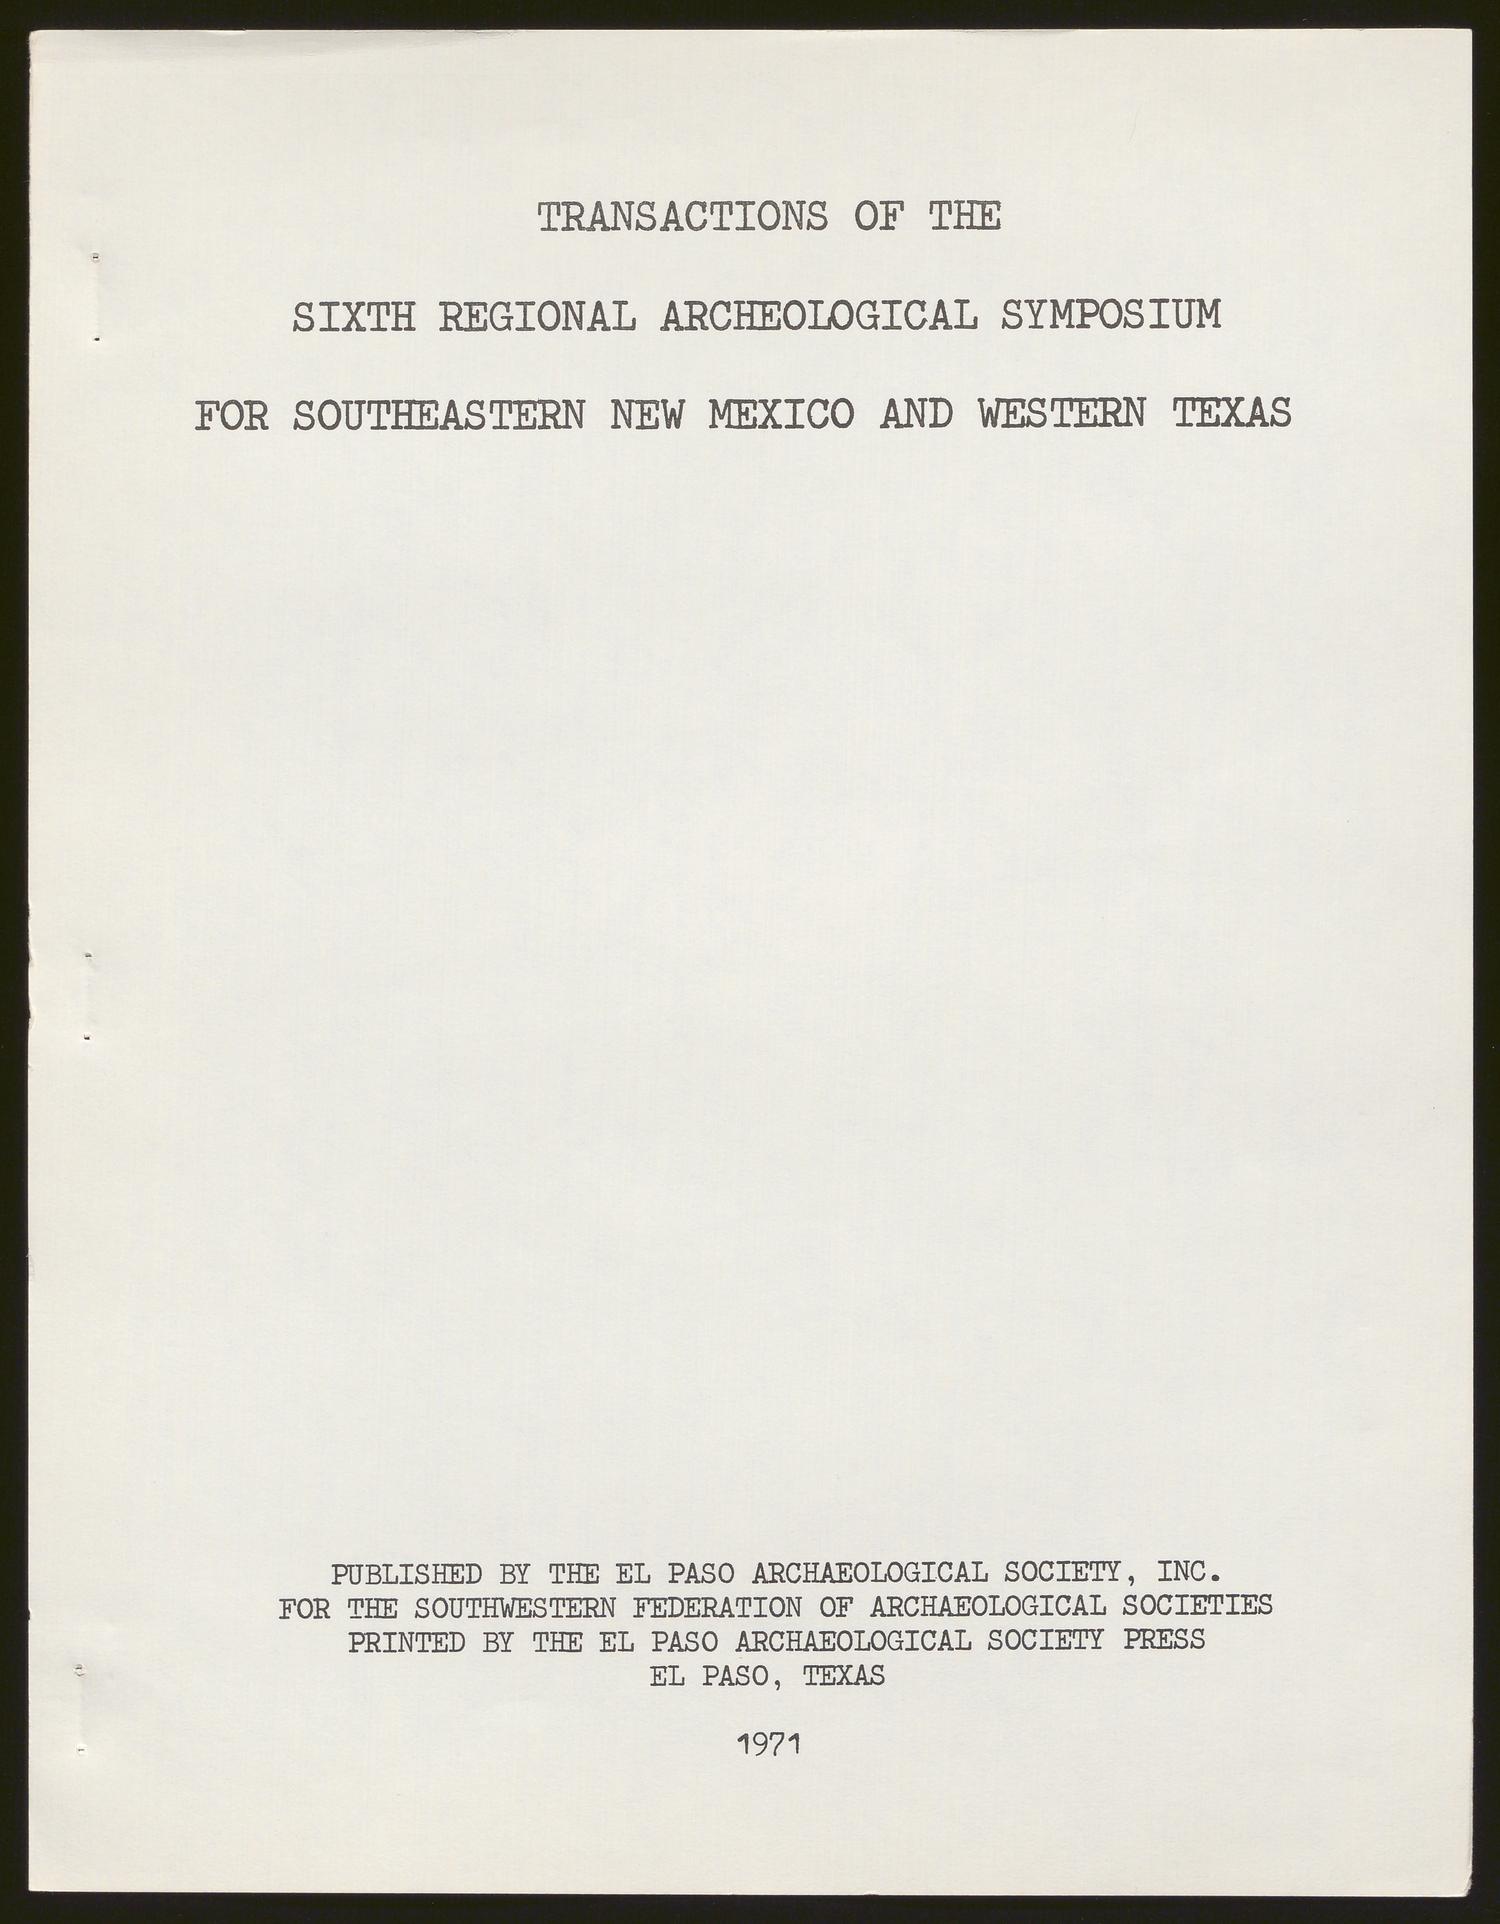 Transactions of the Regional Archeological Symposium for Southeastern New Mexico and Western Texas: 1970
                                                
                                                    Title Page
                                                